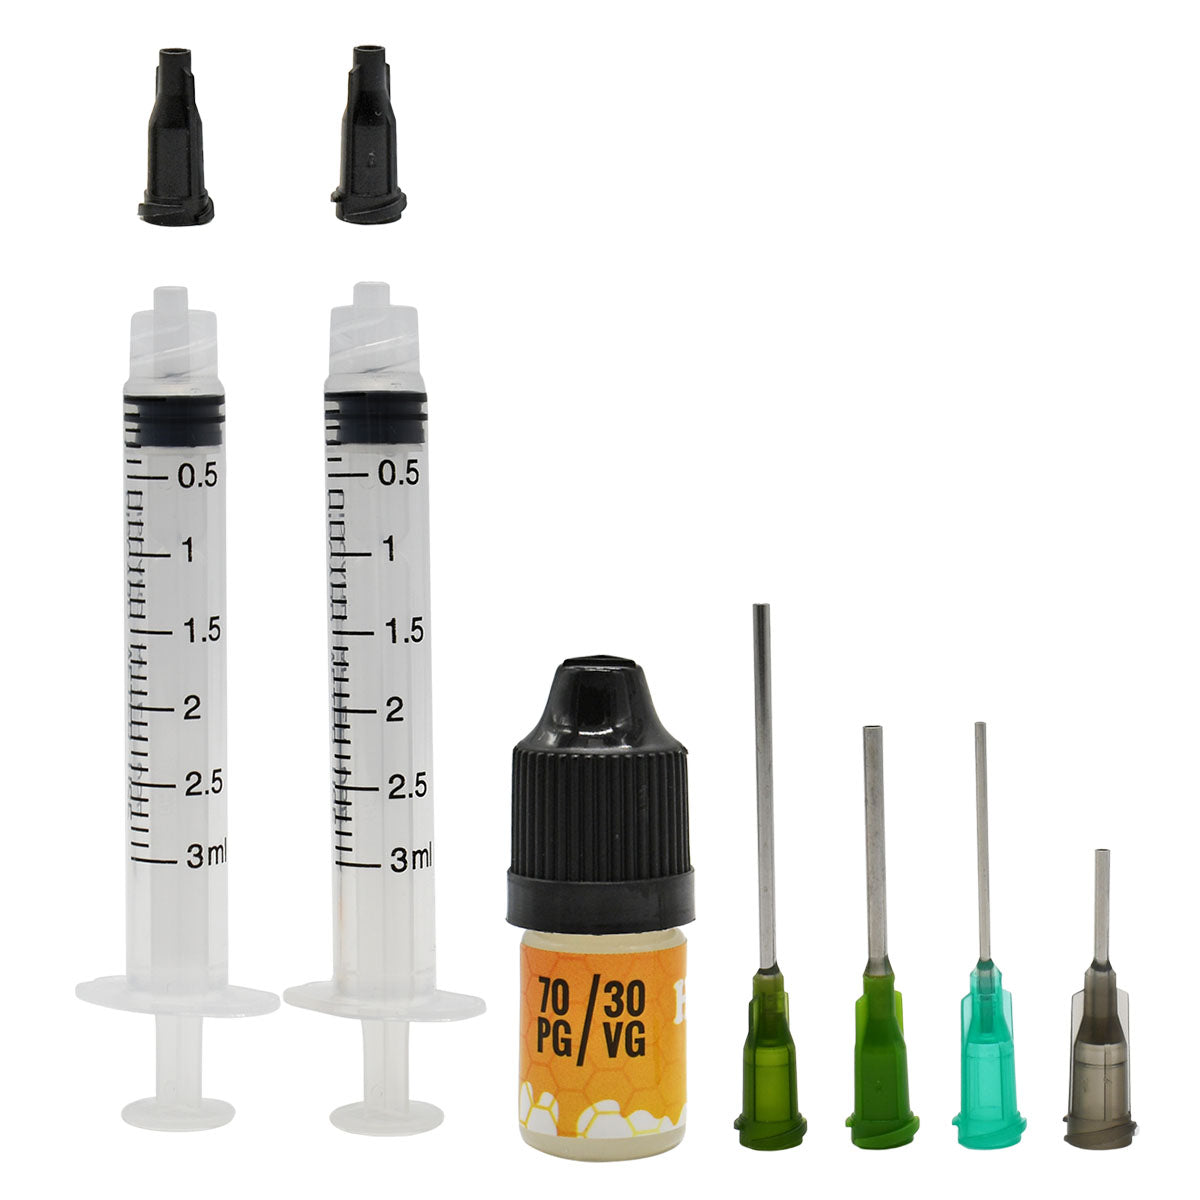 Oil removal and refill tools in CartDub Complete Kit